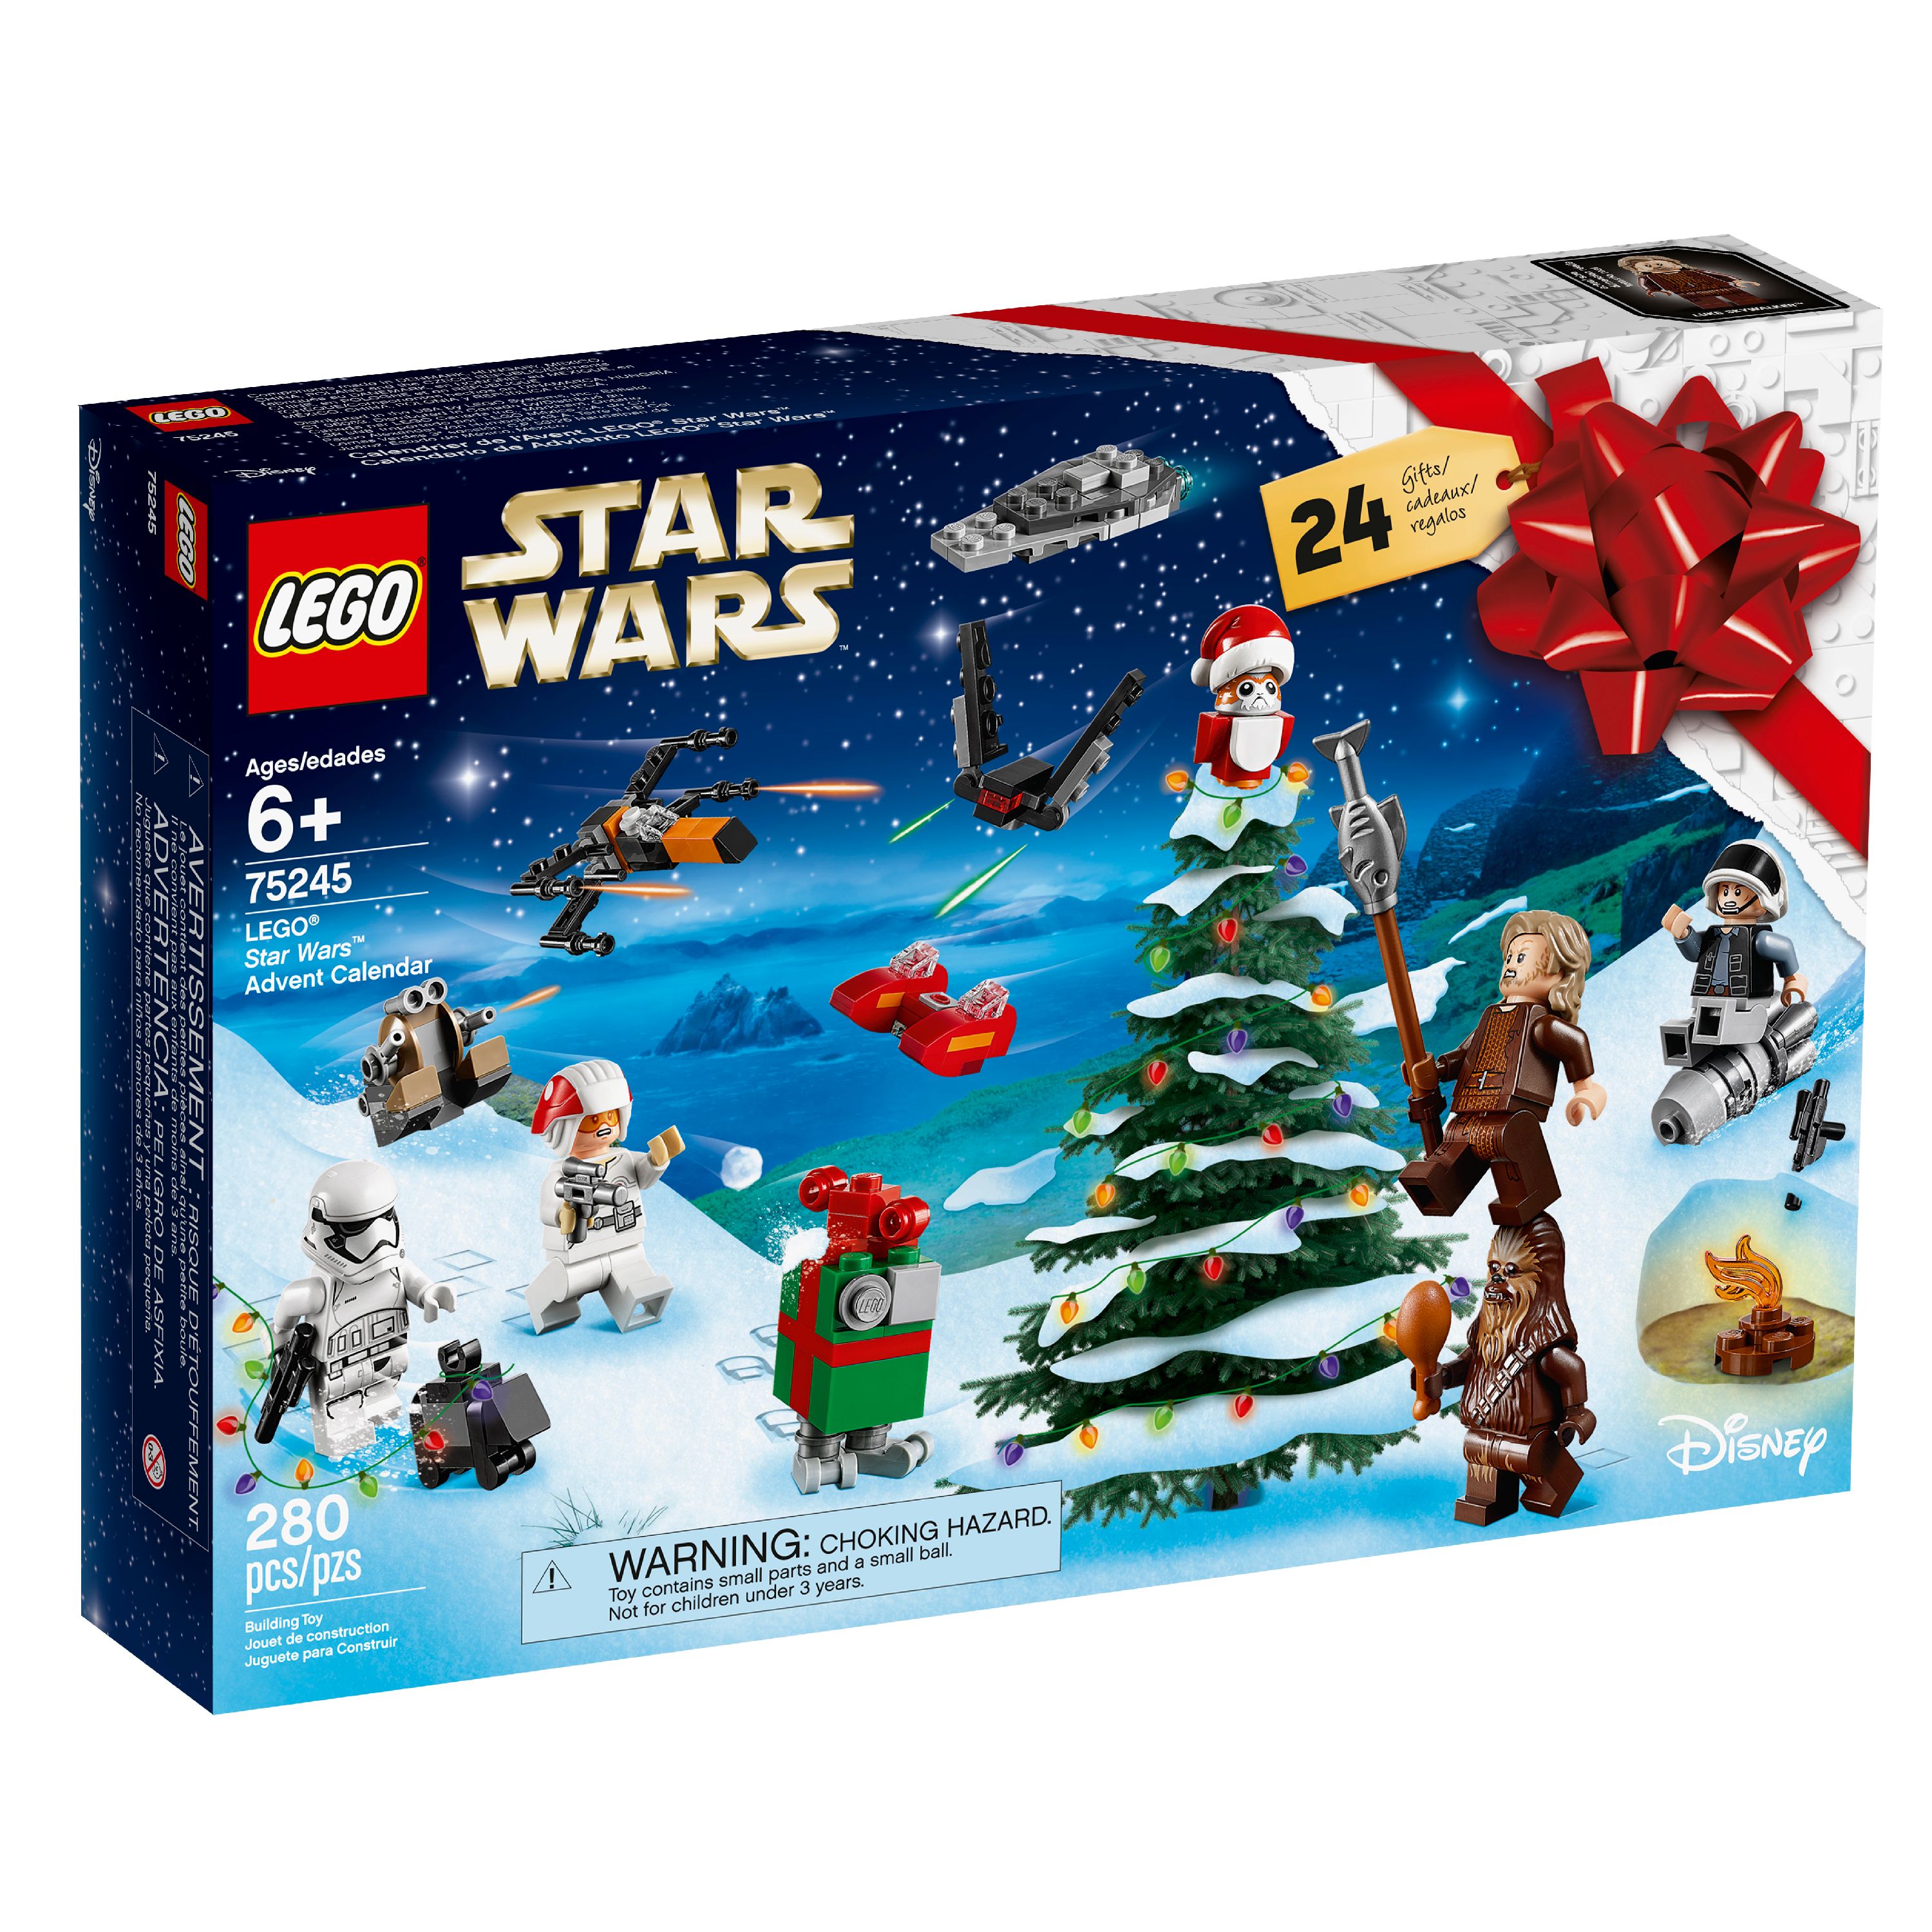 LEGO 75245 Star Wars Advent Calendar Building Kit (280 Pieces) - image 4 of 7